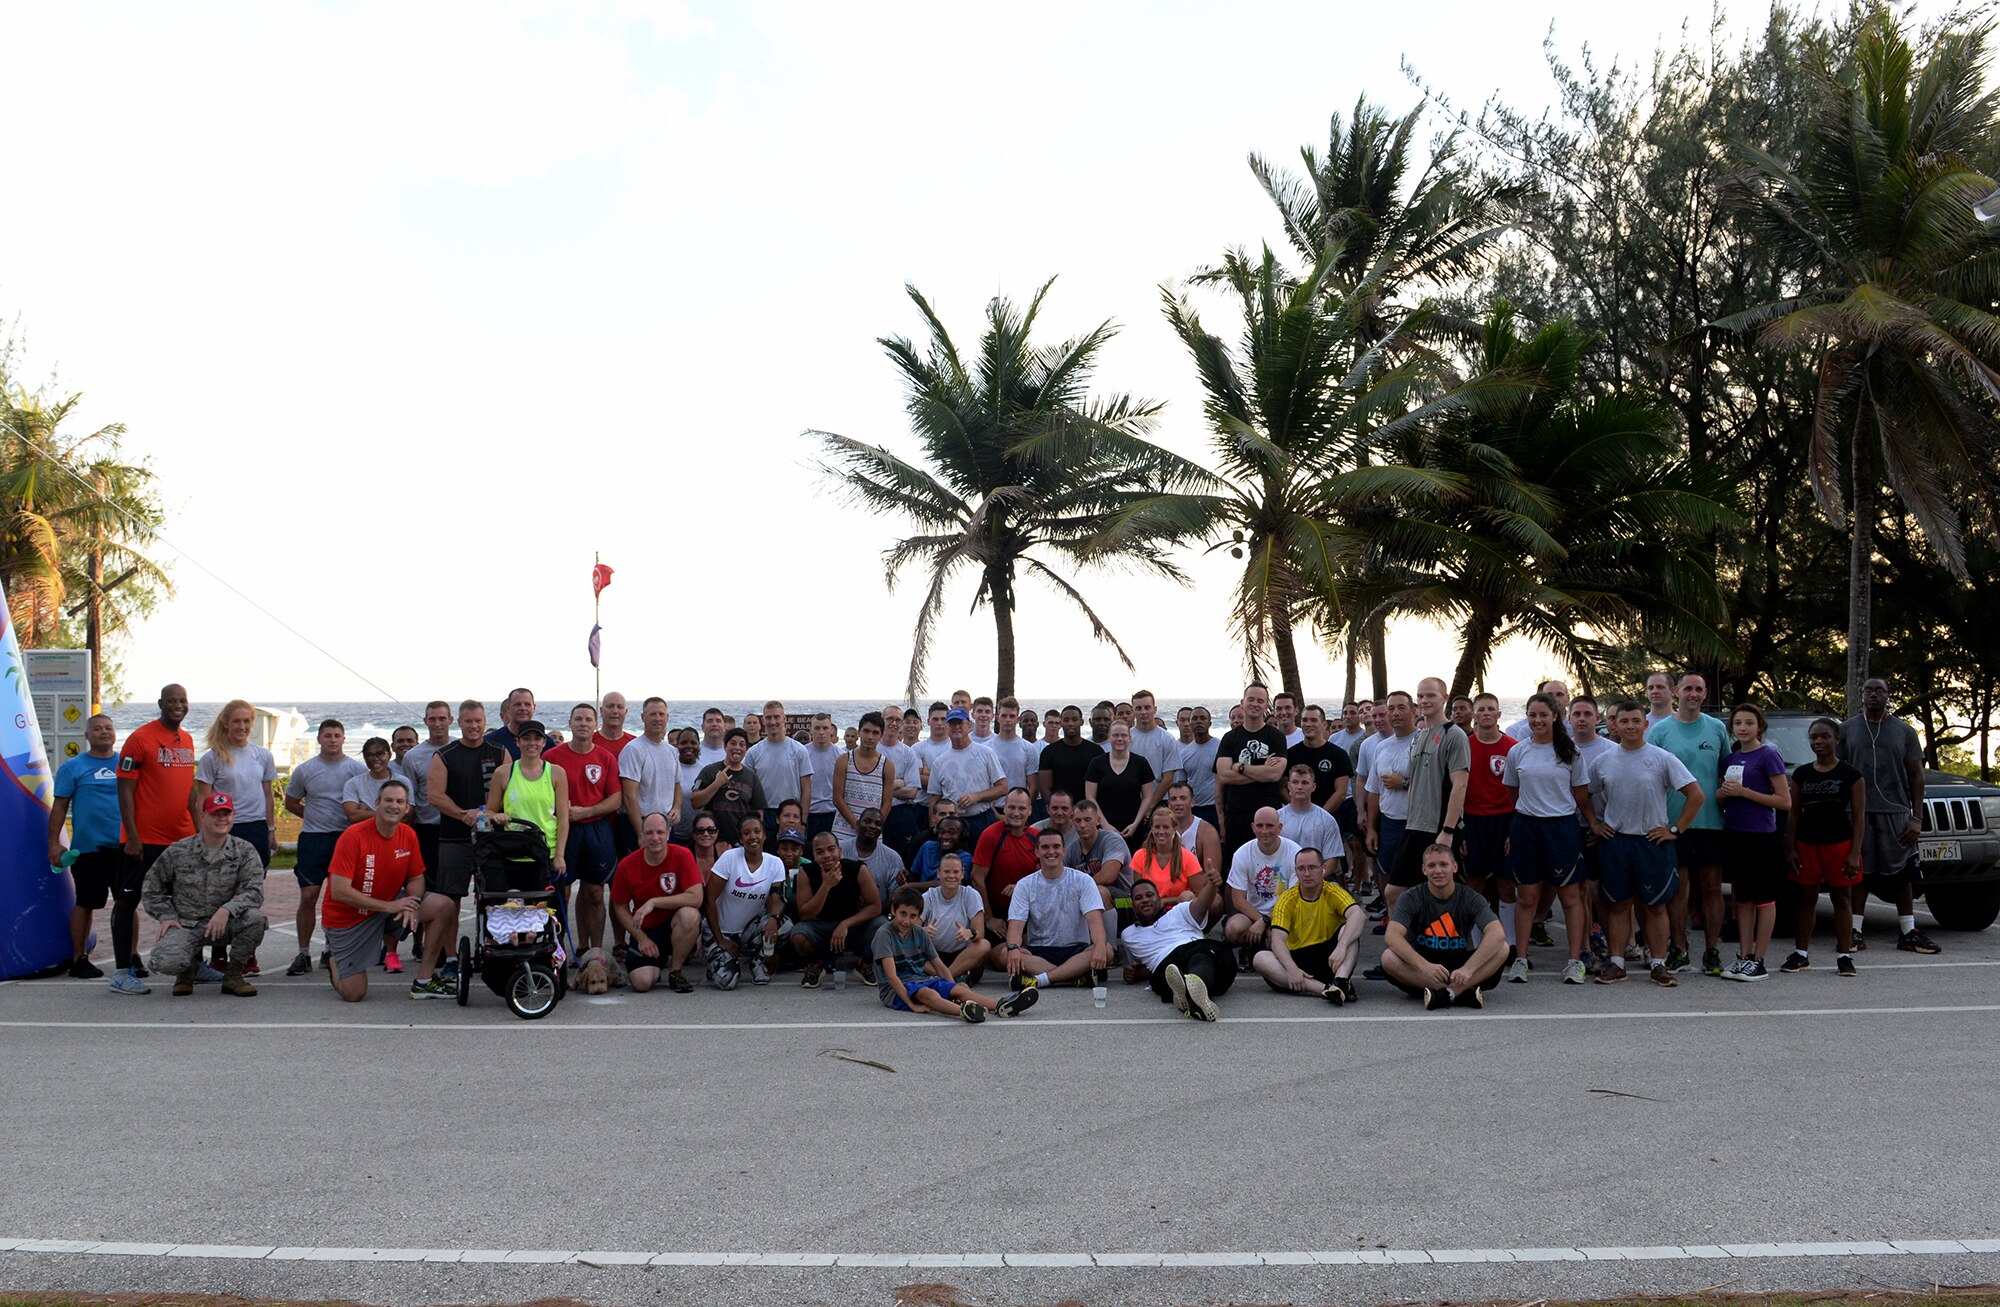 Members of Team Andersen gather for a group photo after completing the I Love to Run 5K hosted by Coral Reef Fitness Center Feb. 11, 2015 at Tarague Beach at Andersen Air Force Base, Guam. More than 180 people came to participate in the 5K and the top four male and female finishers were presented awards at the finish line.  (U.S. Air Force photo by Senior Airman Amanda Morris/Released.)